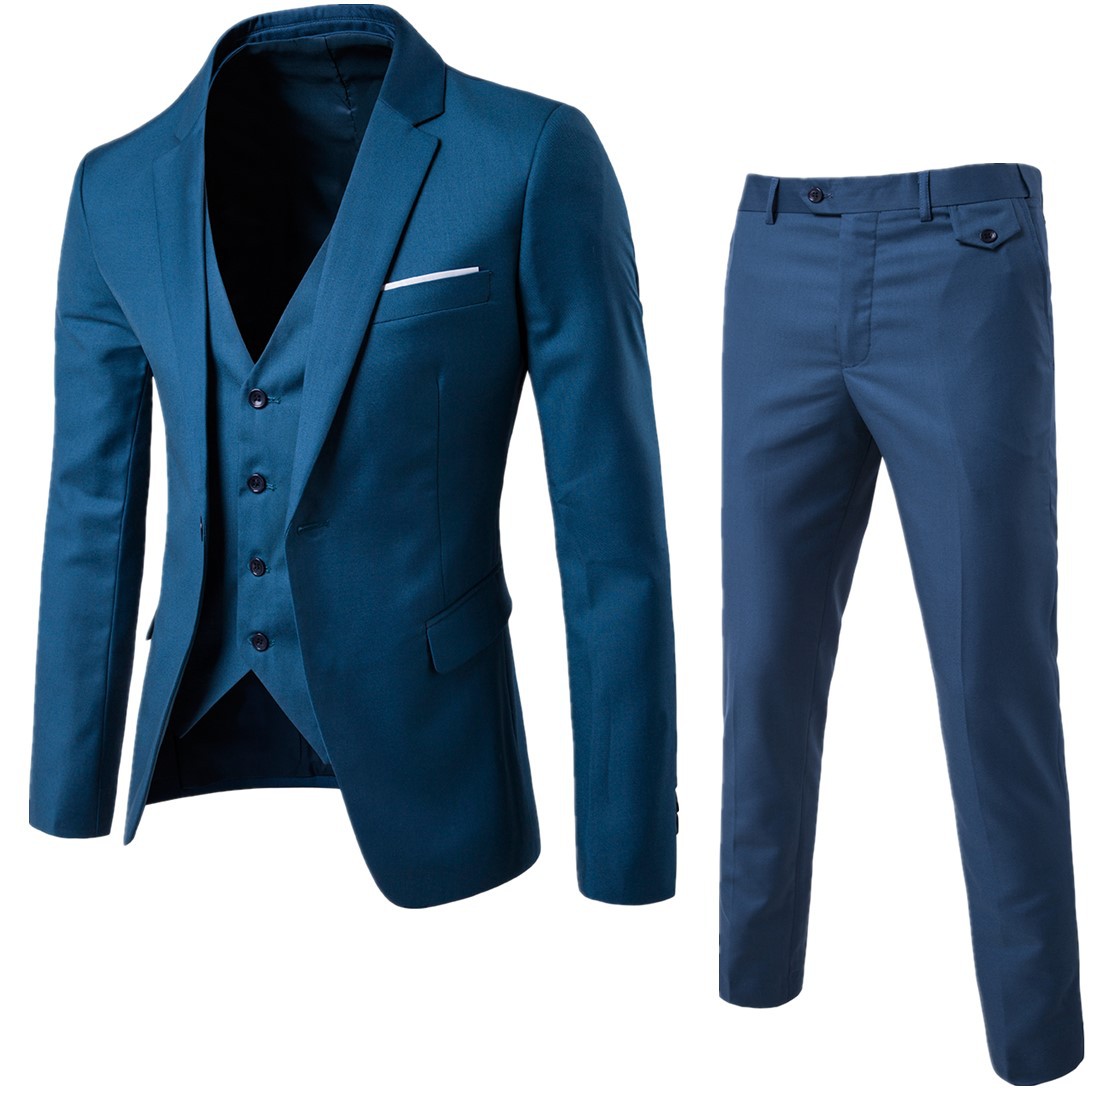 Fine men's three piece suit spring and summer new striped men's slim suit business casual suit